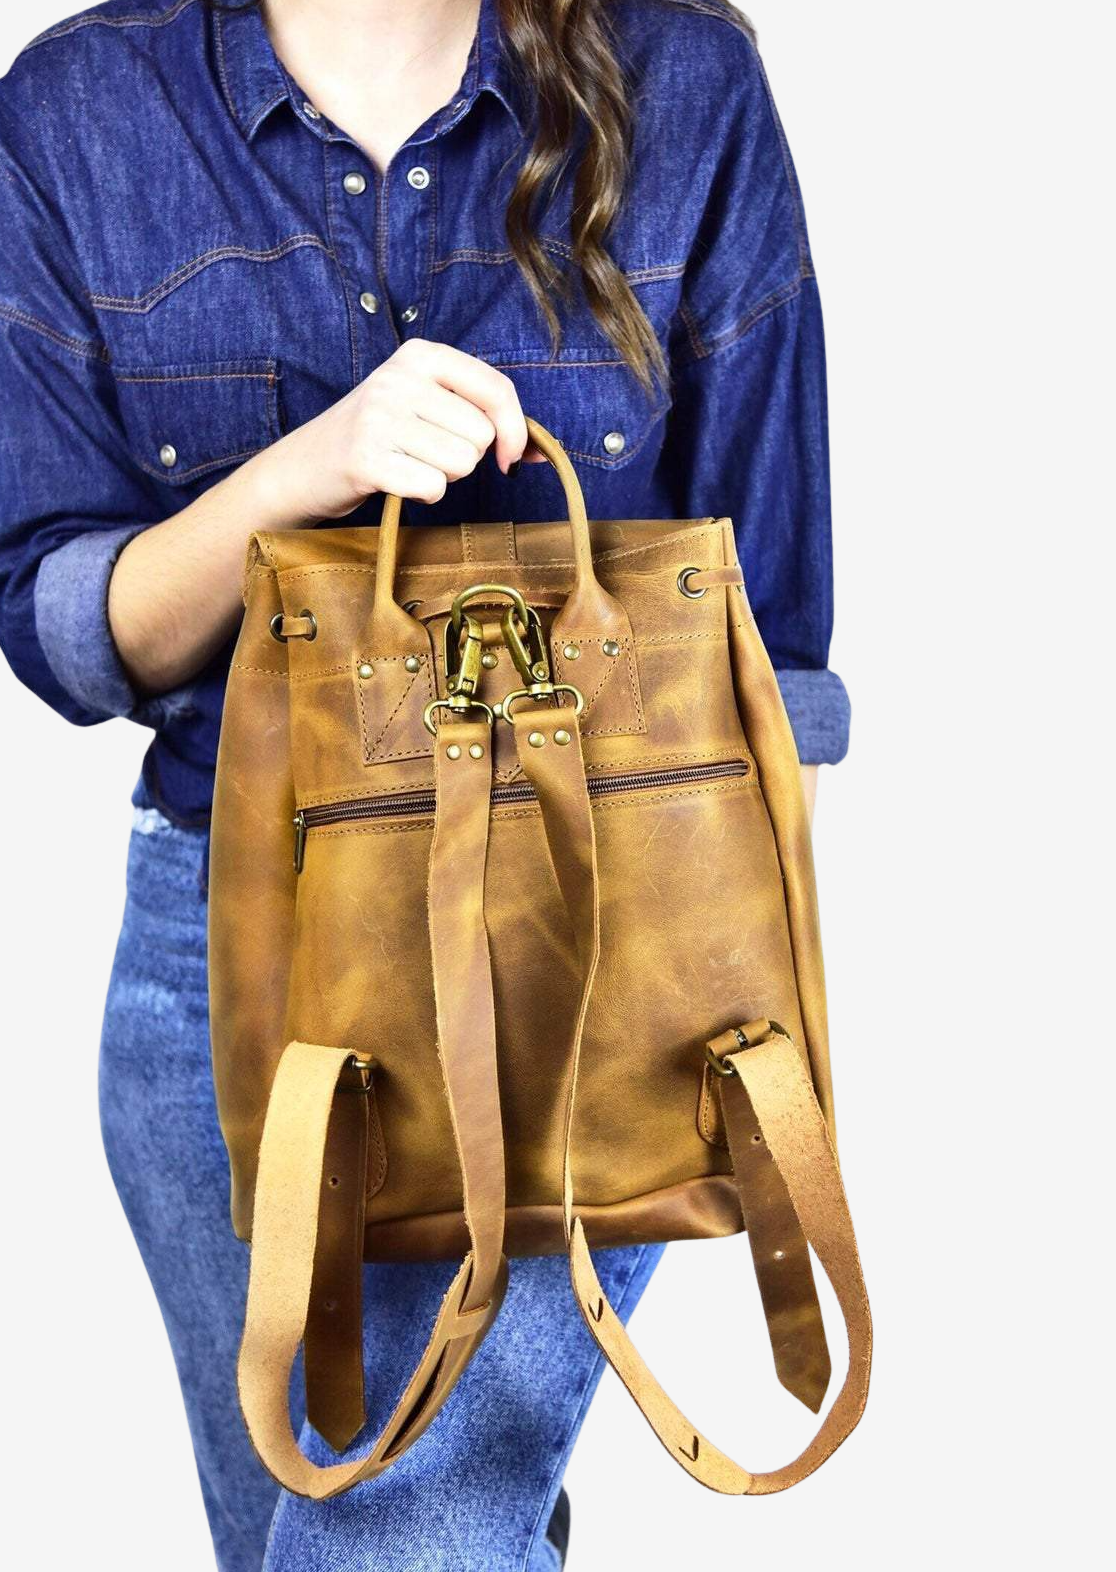 leather backpack made in Greece